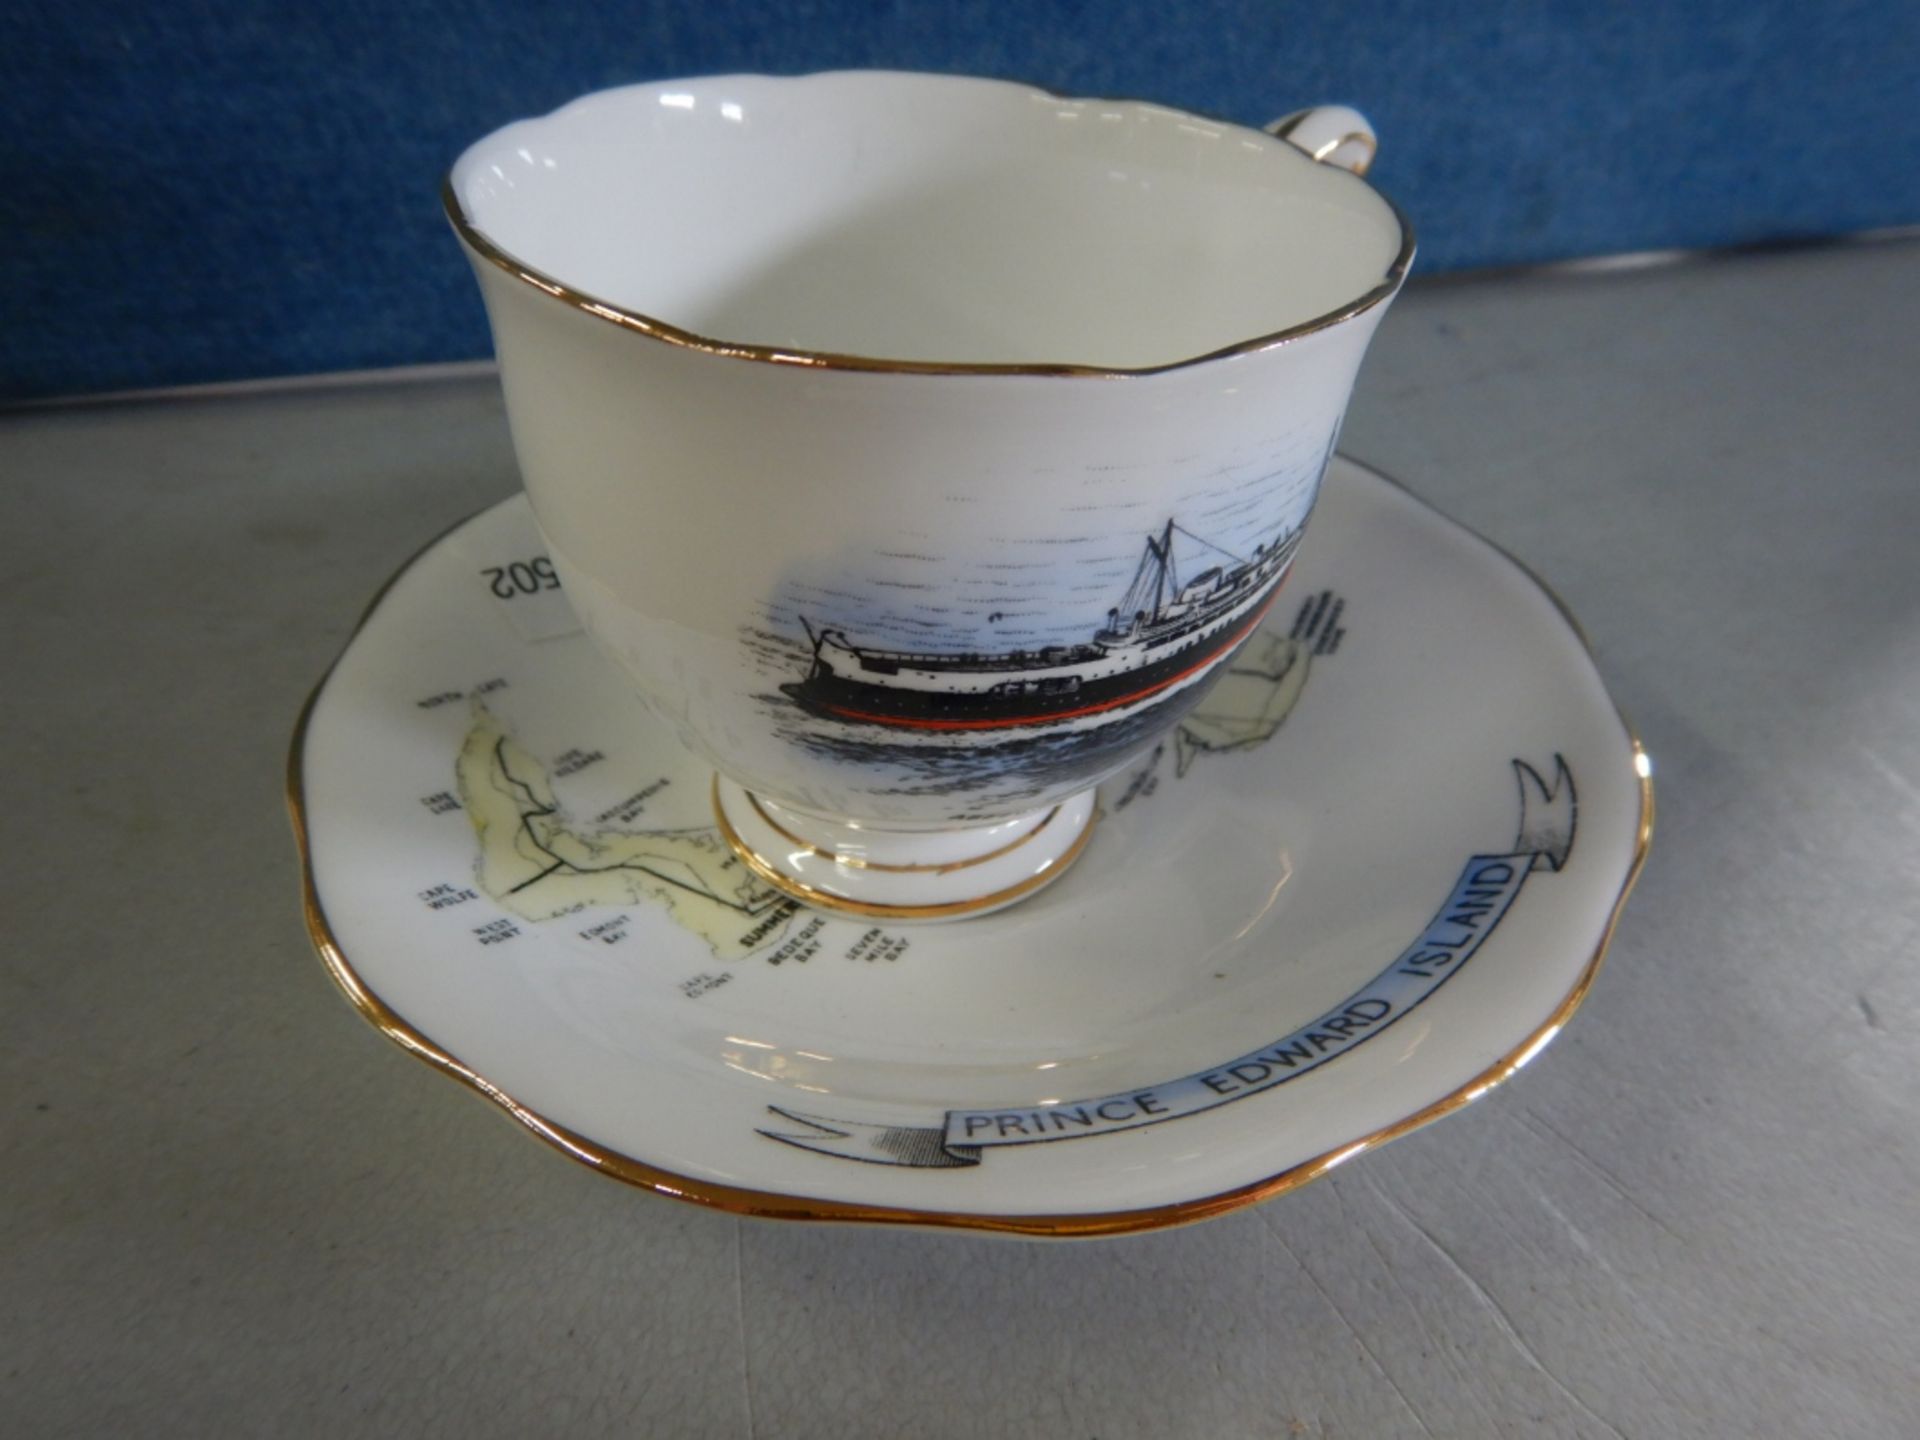 ANTIQUE TEACUPS & SAUCERS - MADE IN ENGLAND - LOT OF 3 - FINE BONE CHINA "PRINCE EDWARD ISLAND" - - Image 11 of 15